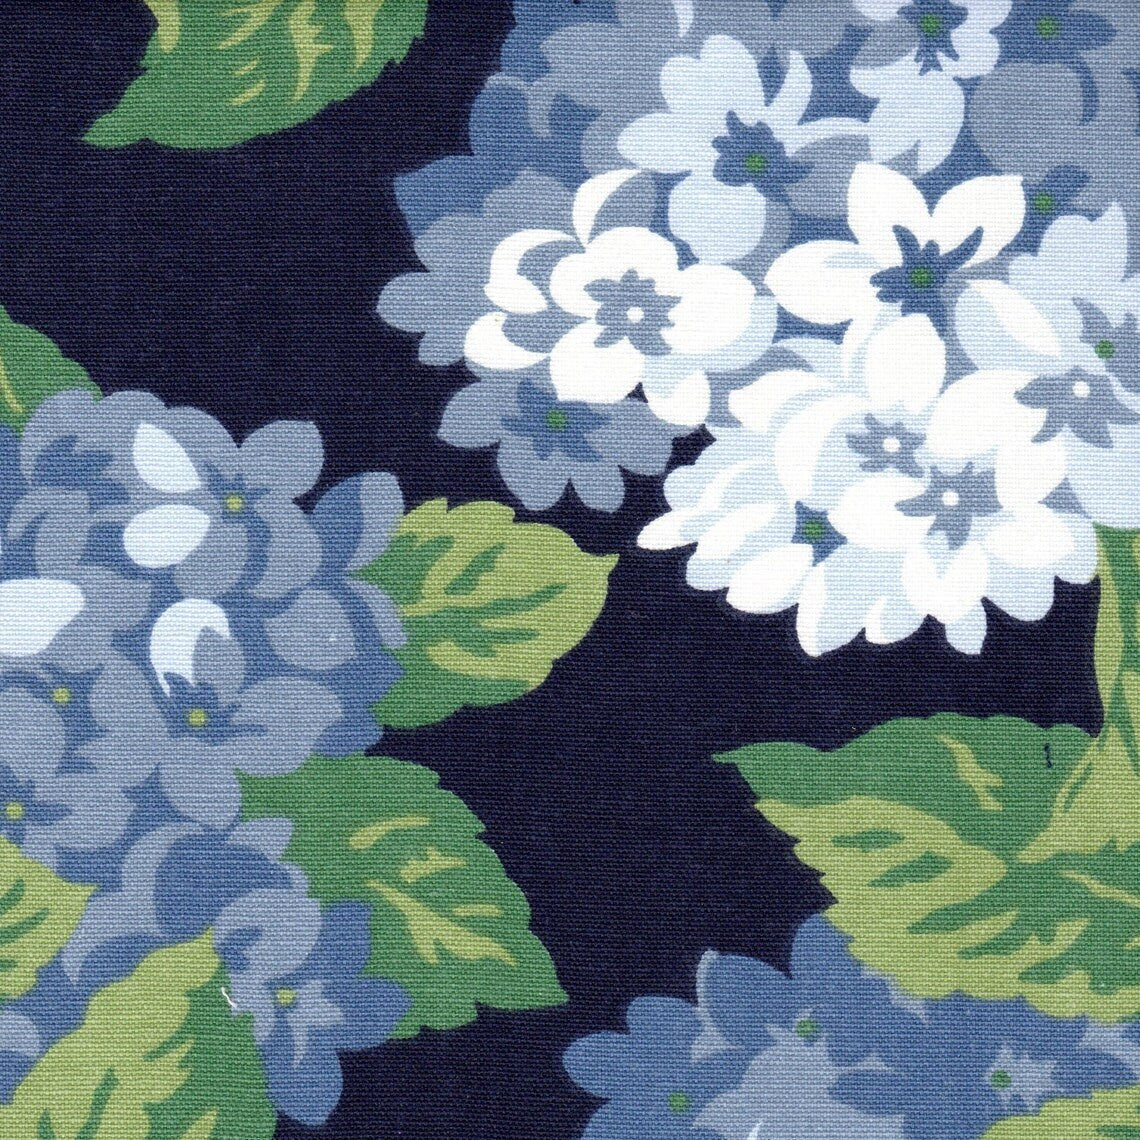 pillow sham in summerwind navy blue hydrangea floral, large scale